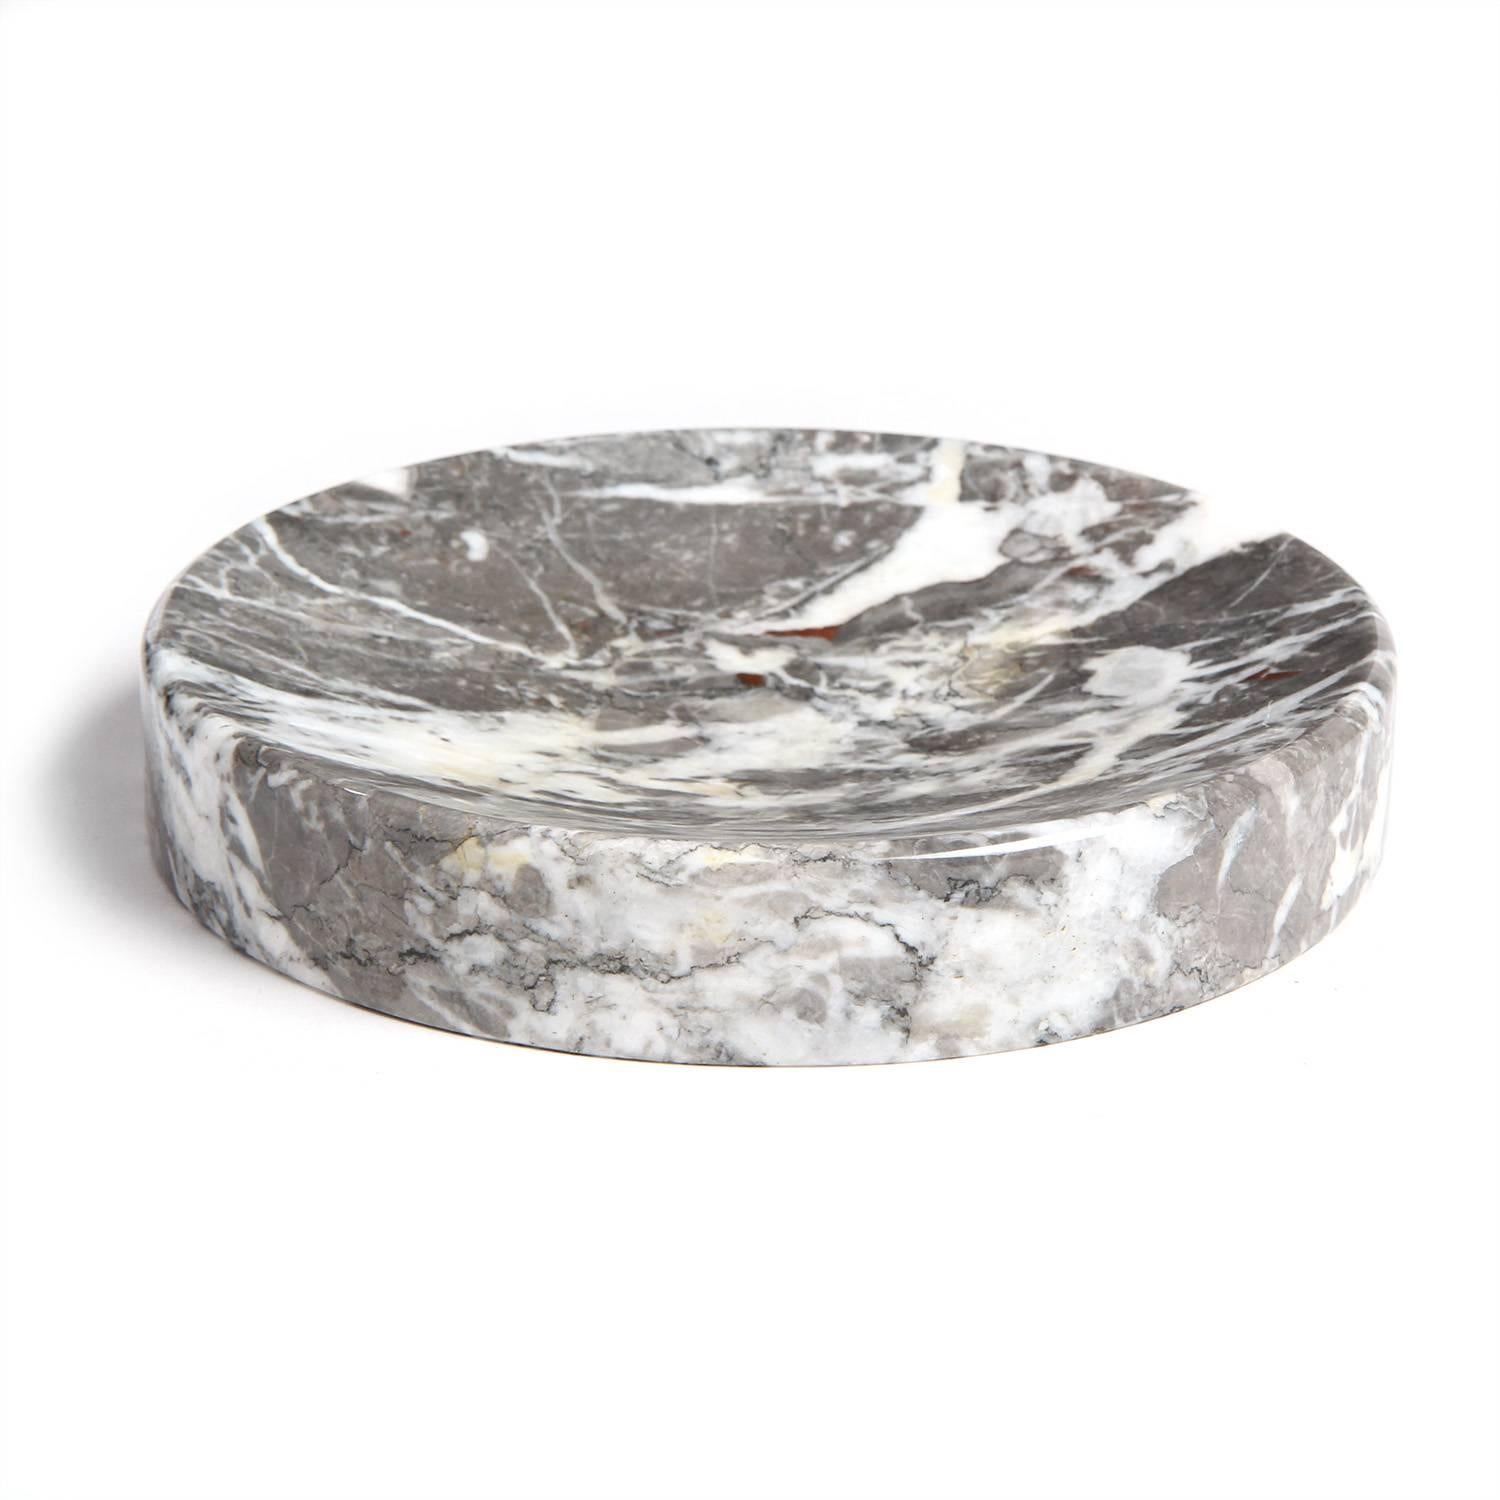 A masterfully rendered shallow bowl crafted of vividly figured grey and cream marble.